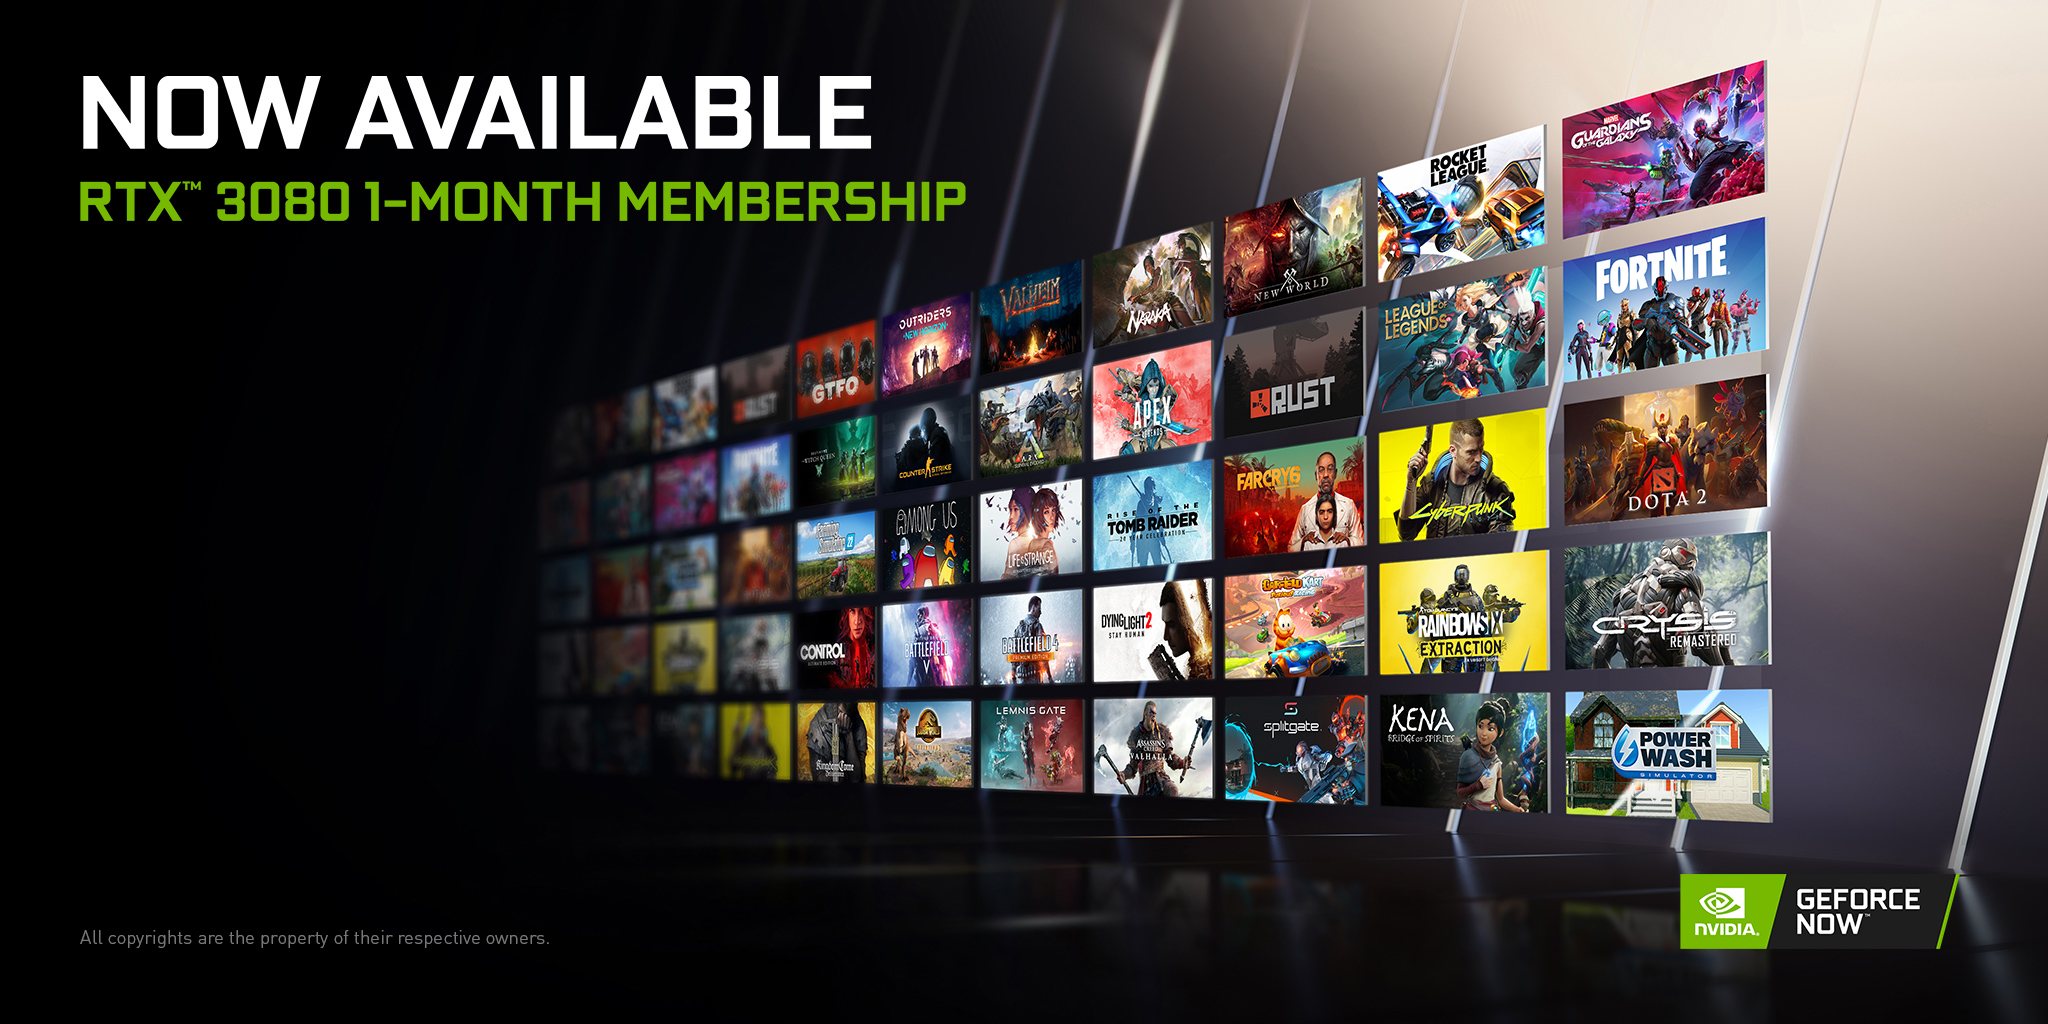 GeForce NOW RTX 3080 1-Month Memberships